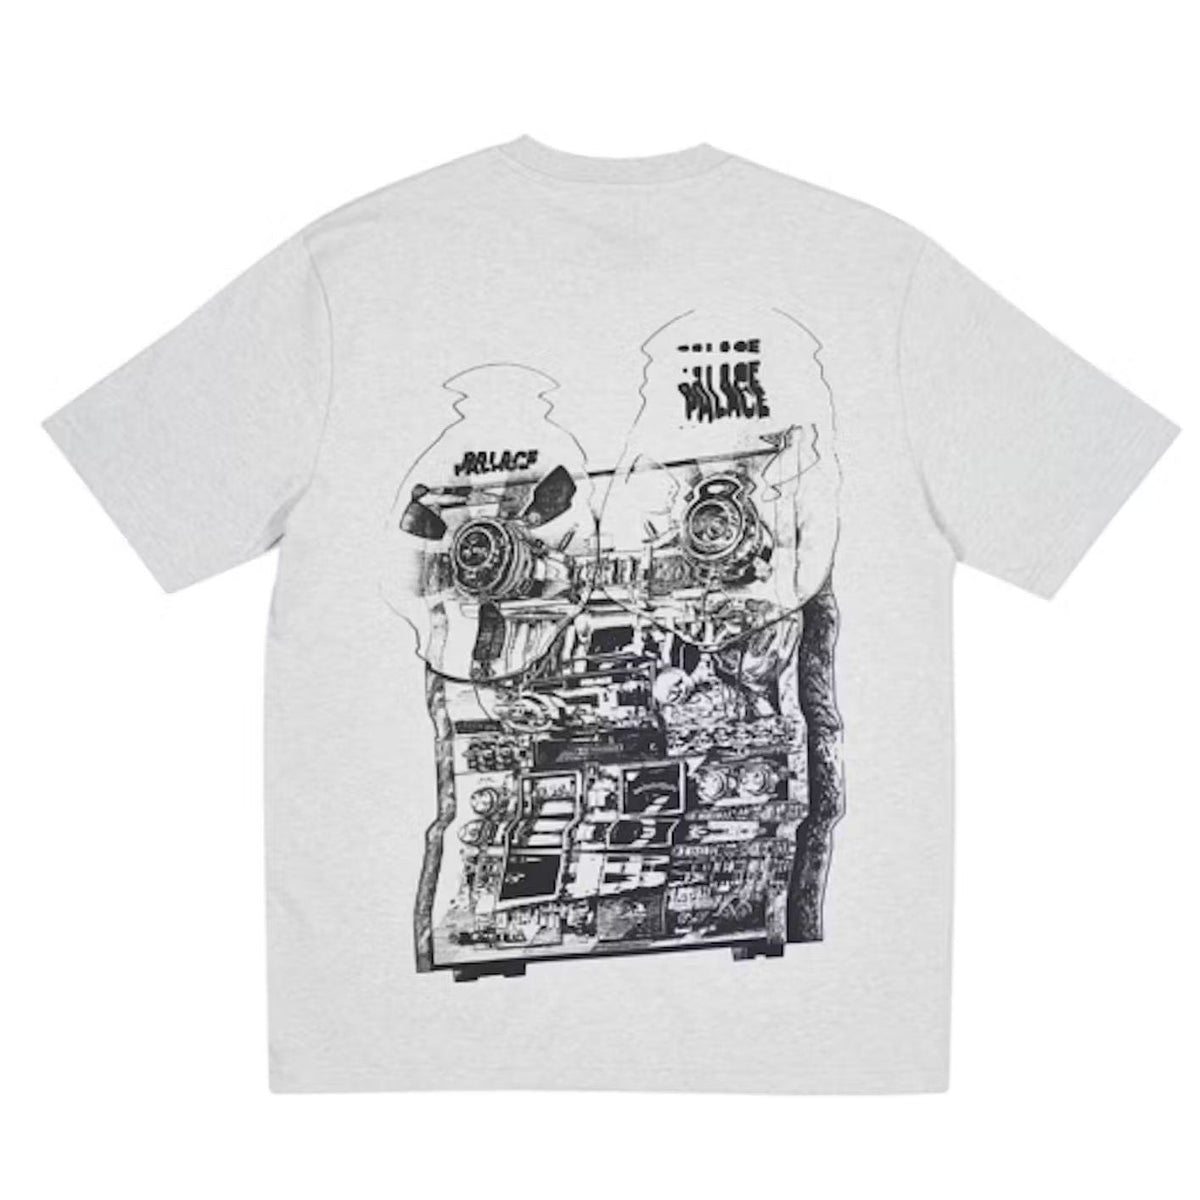 Palace Tri-Wobble T-Shirt (Grey Marl) | Waves Never Die | Palace | Clothing